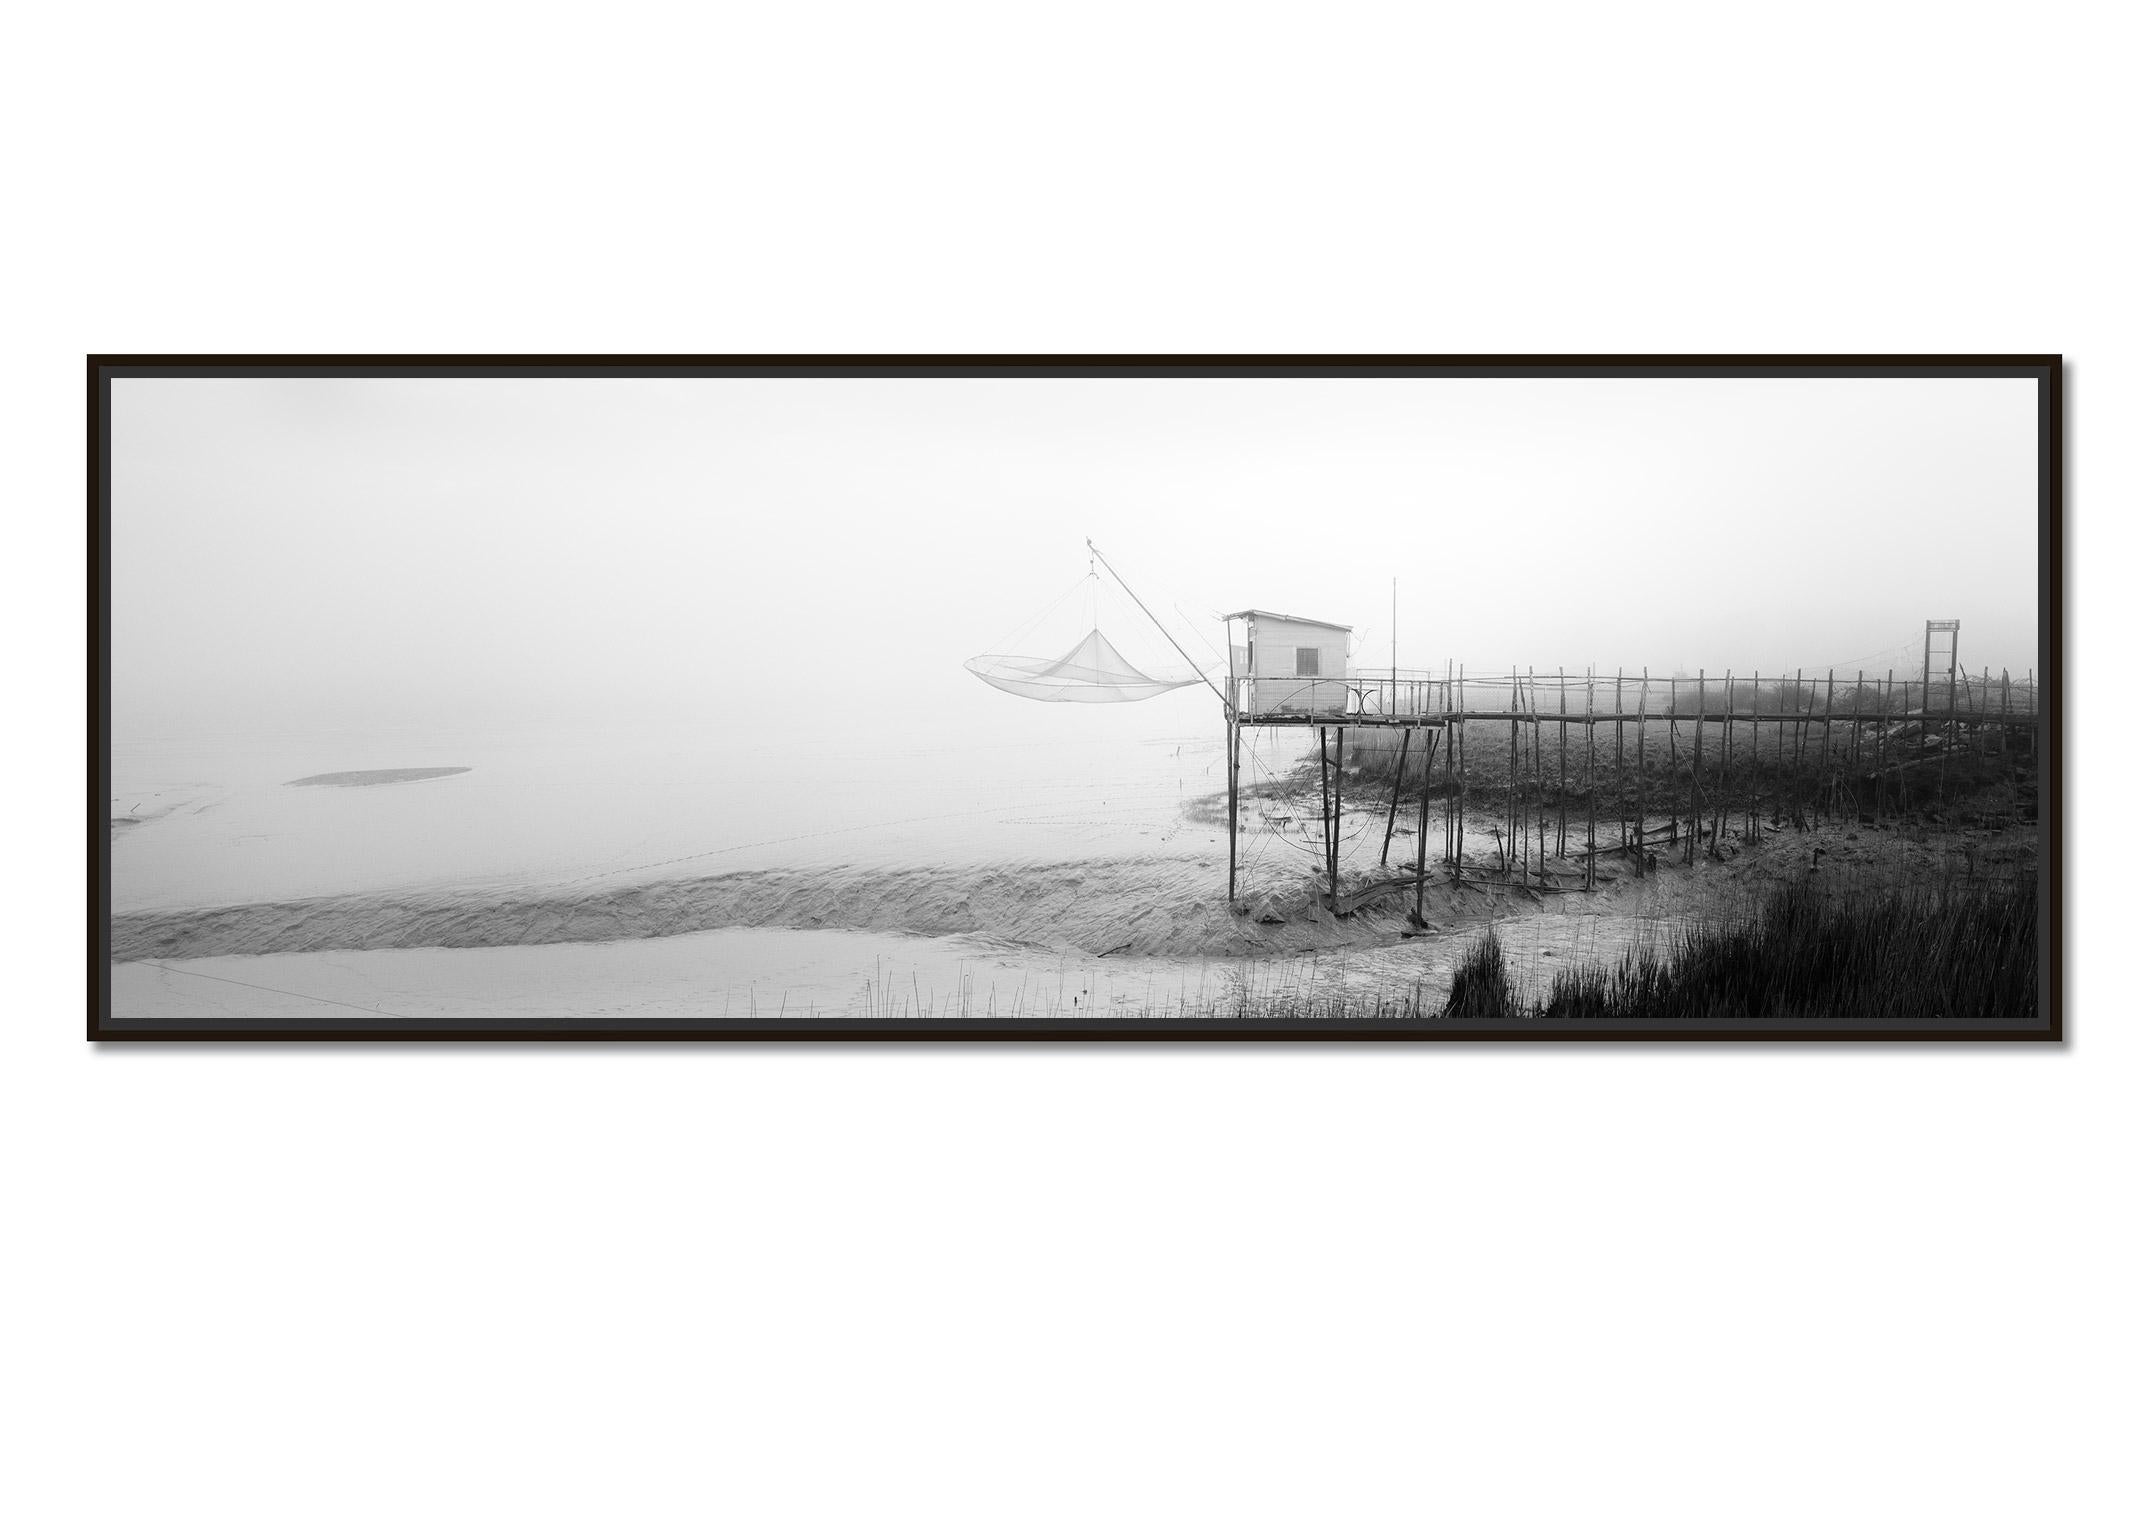 Foggy Stilt House Panorama, France, black and white art photography, landscape - Photograph by Gerald Berghammer